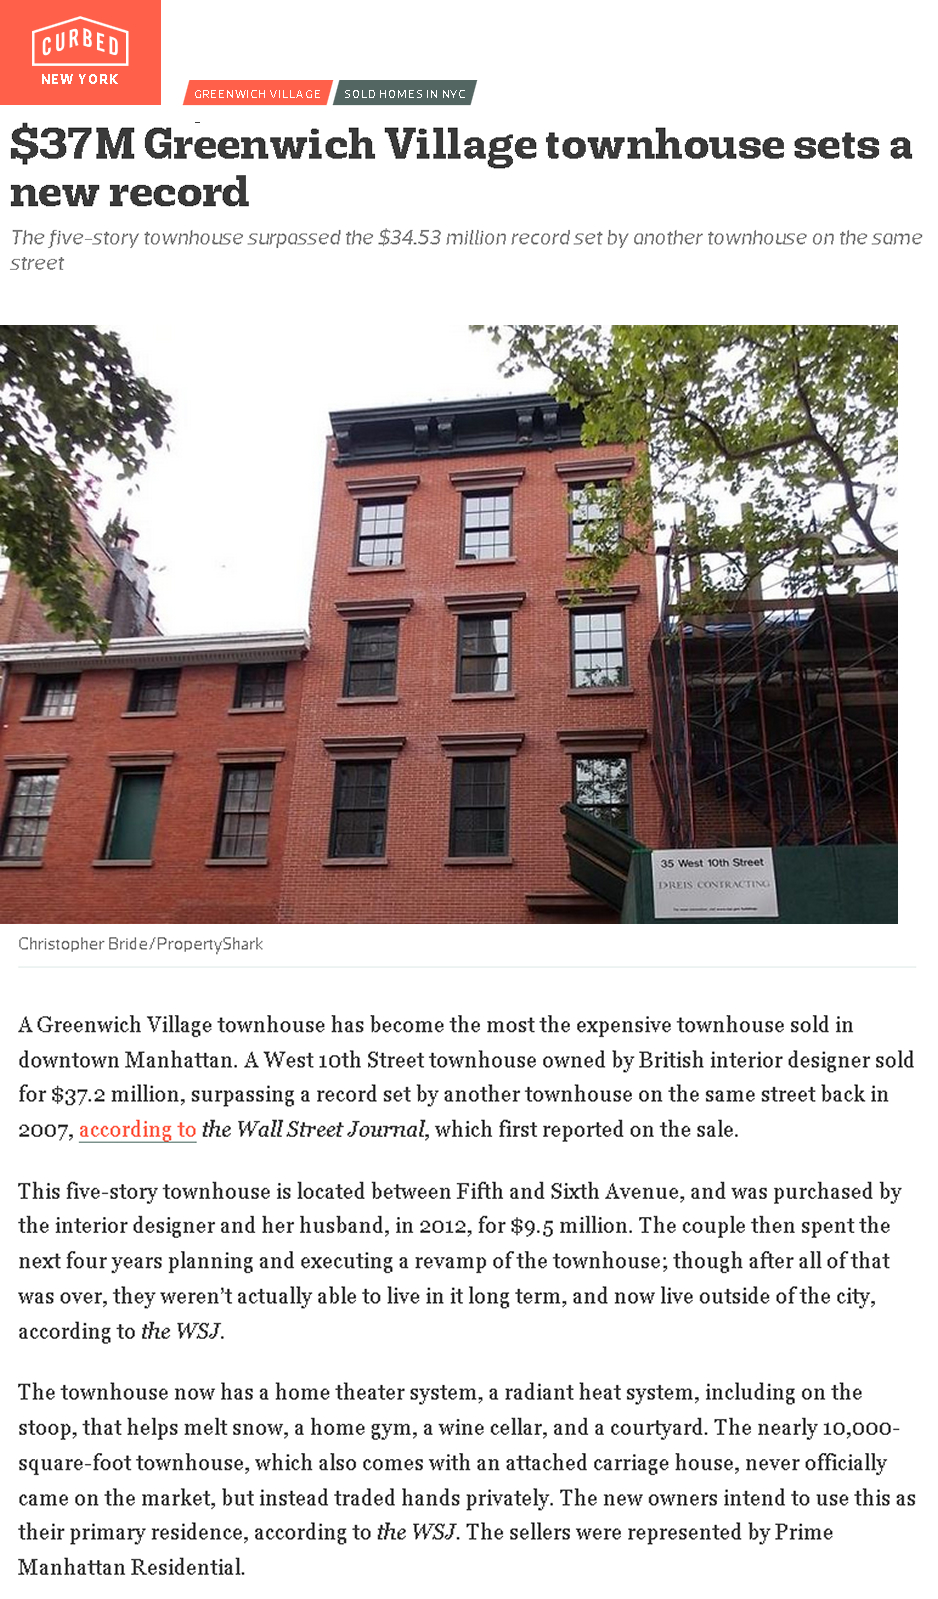 Greenwich Village Townhouse Sets a New Record part 1